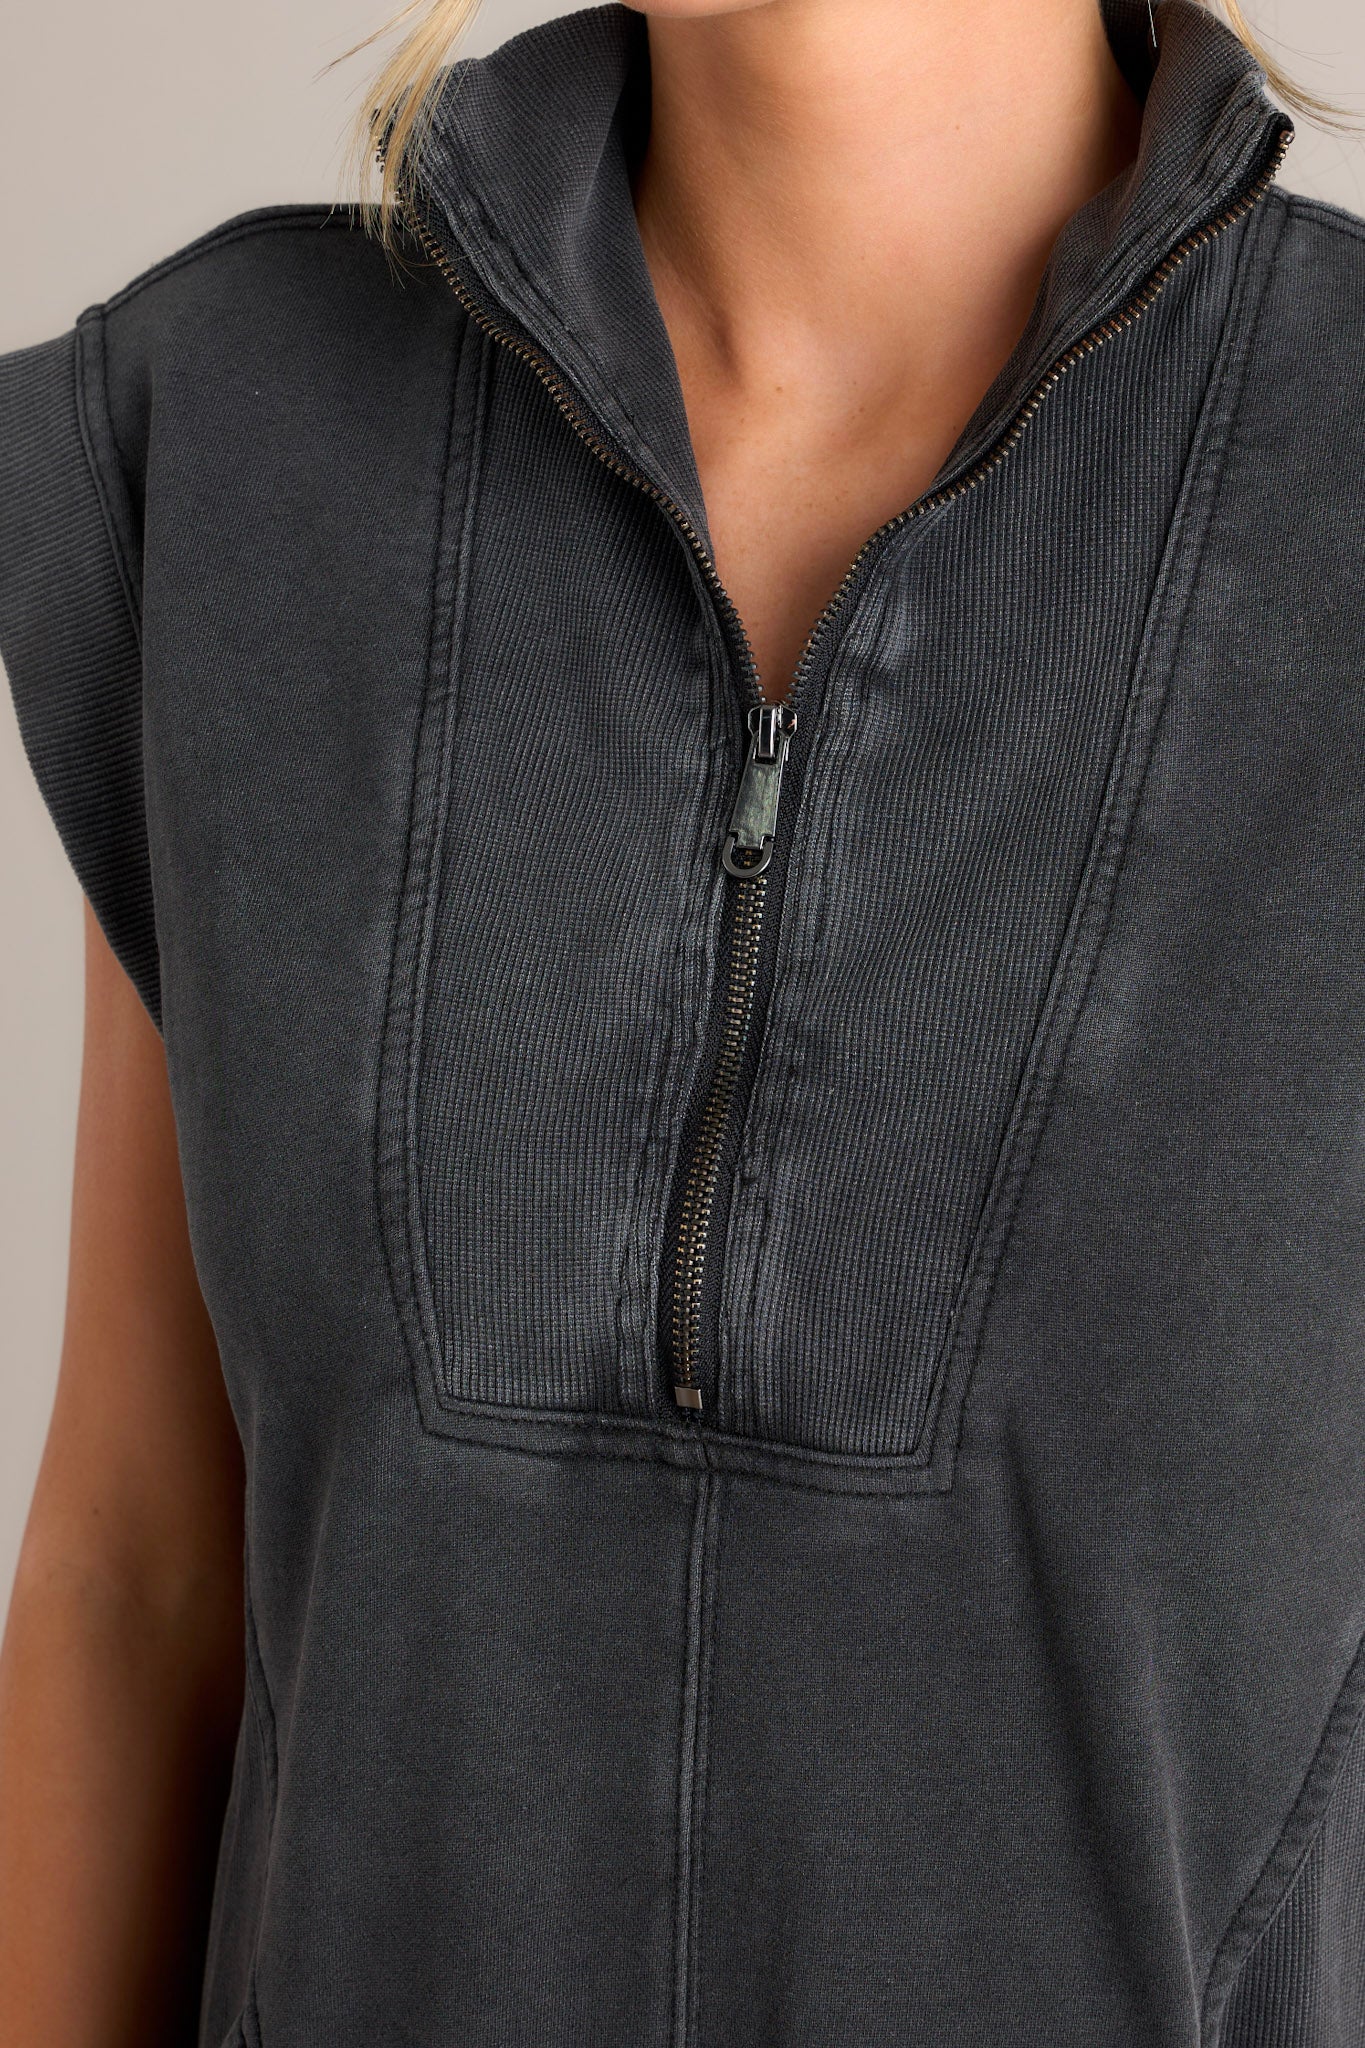 Close-up of the charcoal mini dress showing the collared v-neckline, functional zipper front, ribbed detailing, and functional front pockets.